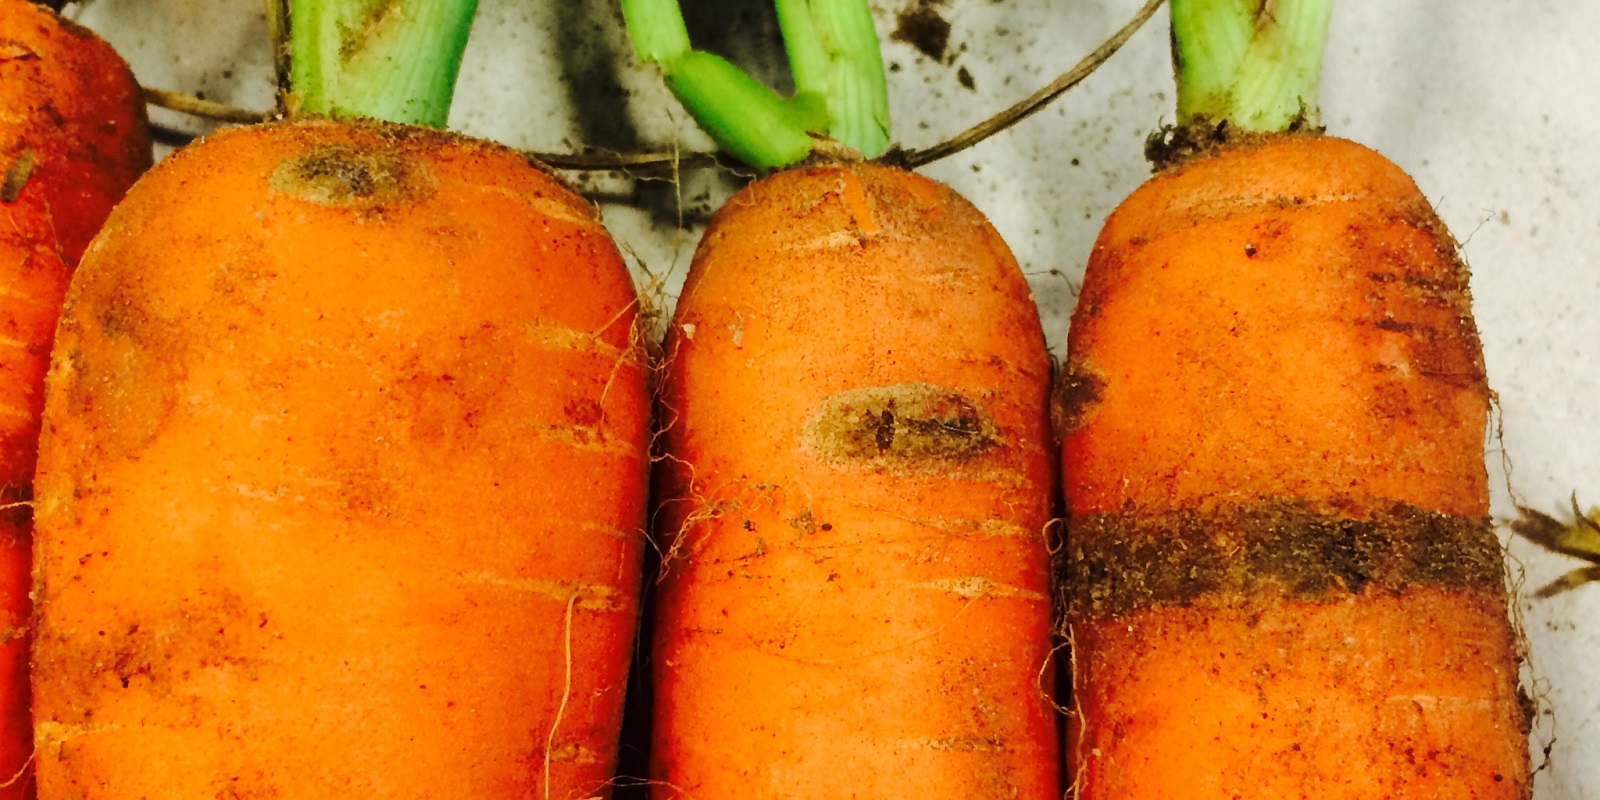 Scab in Carrots